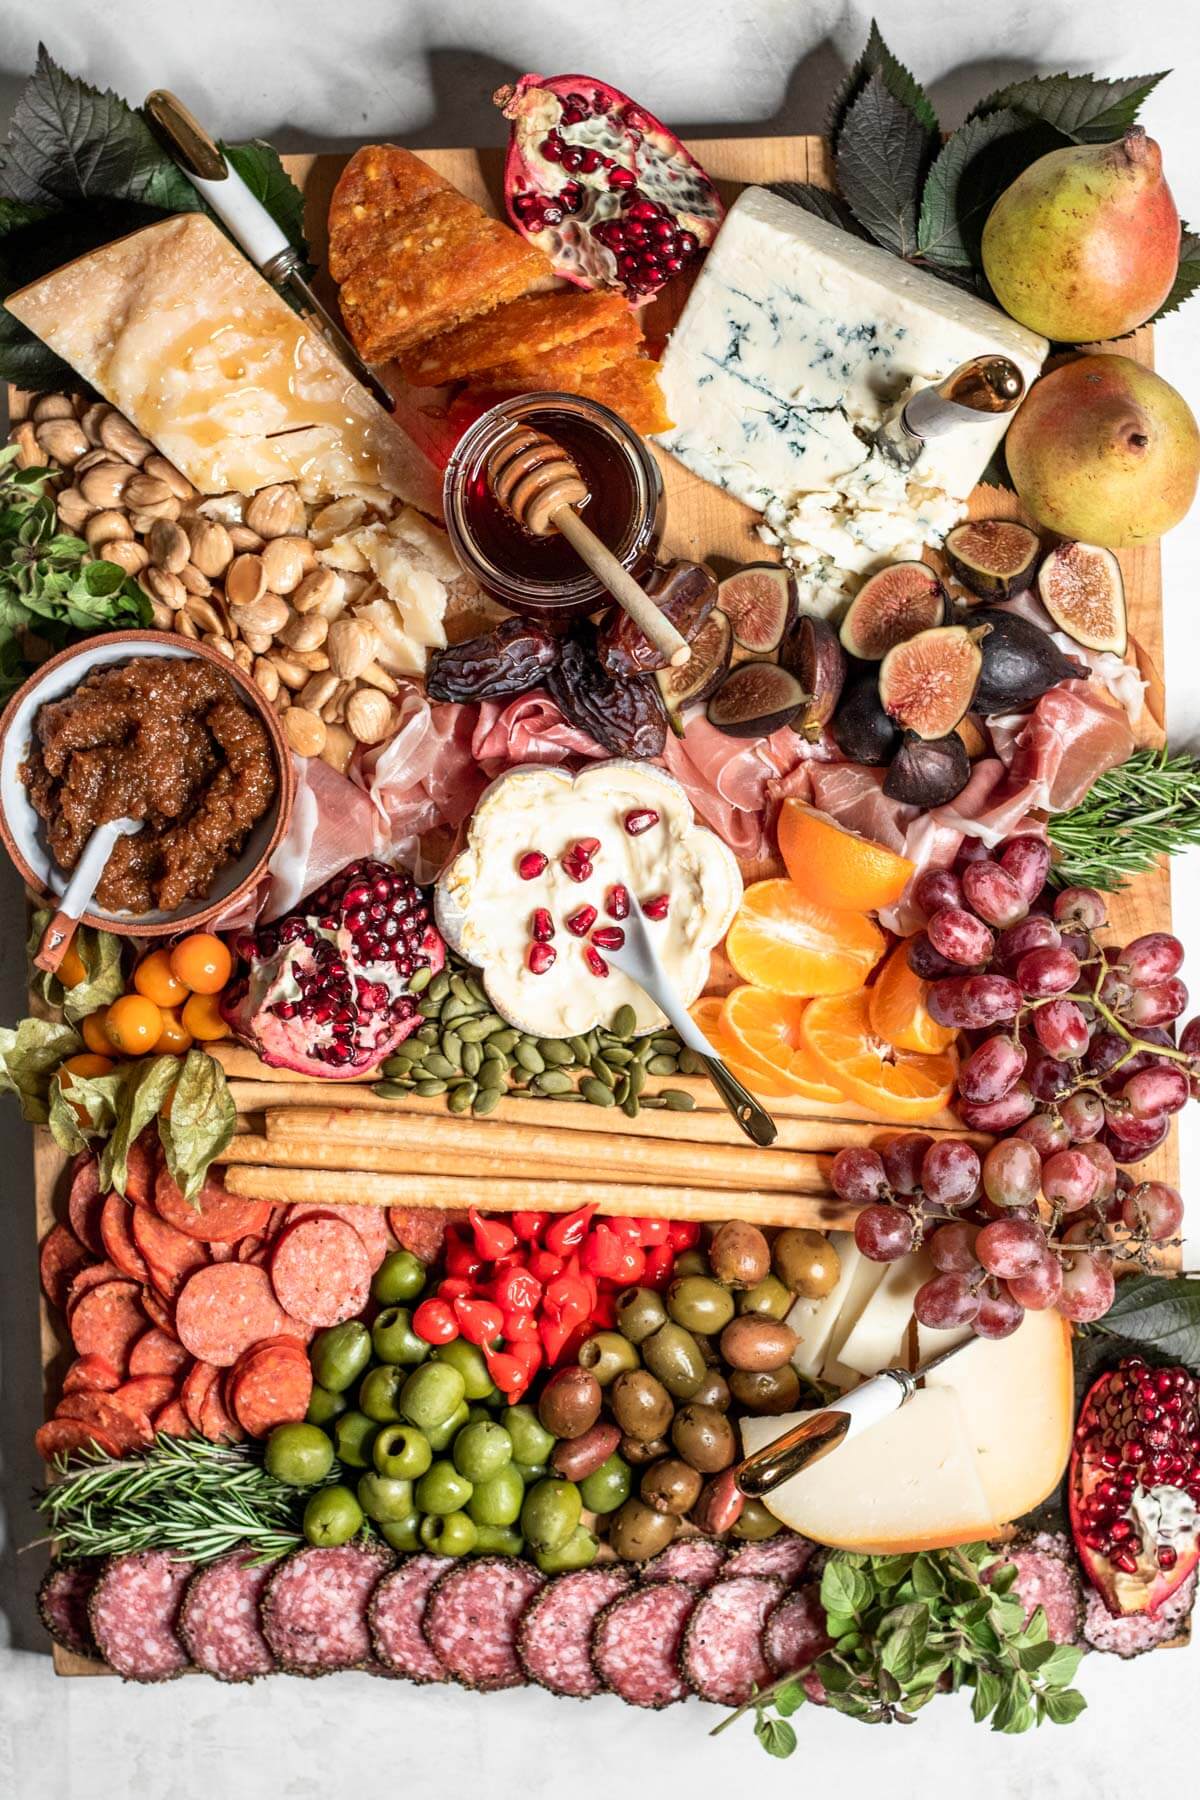 OVER THE TOP BOARD FILLED WITH CHEESE, MEATS, NUTS, AND FRUIT